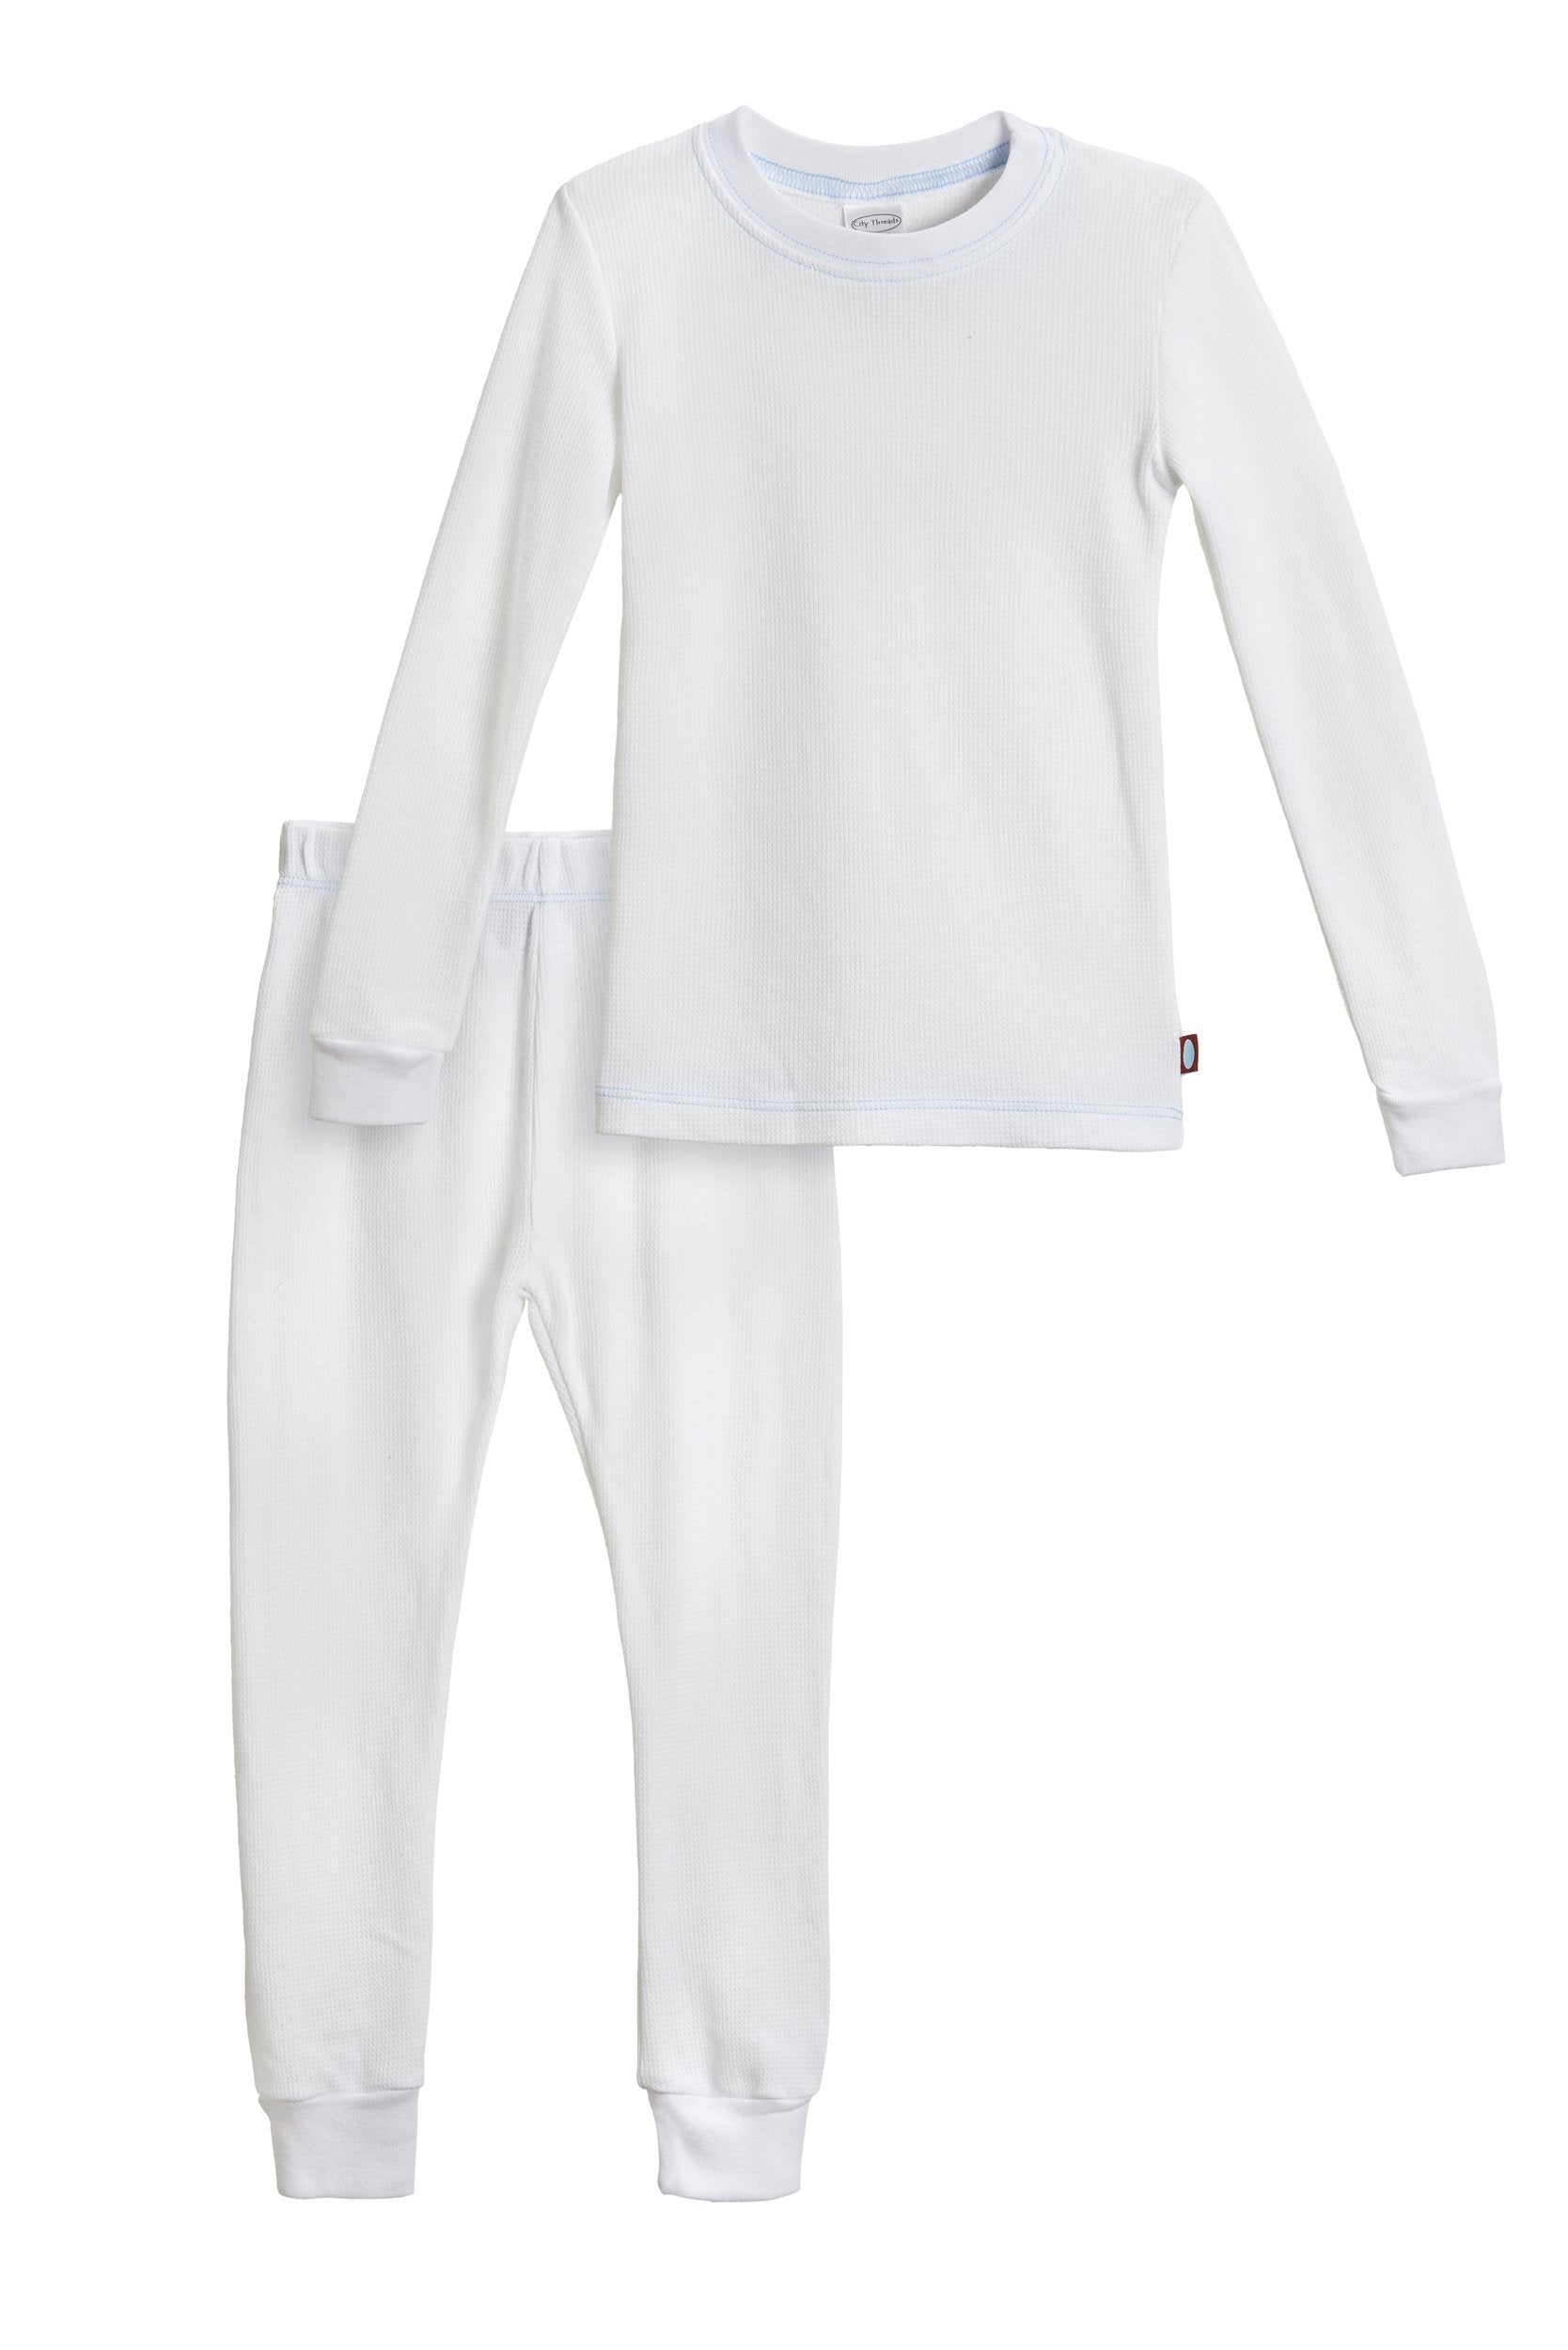 Mens White 2 Pack Cotton Blend Thermal Underwear Long Johns